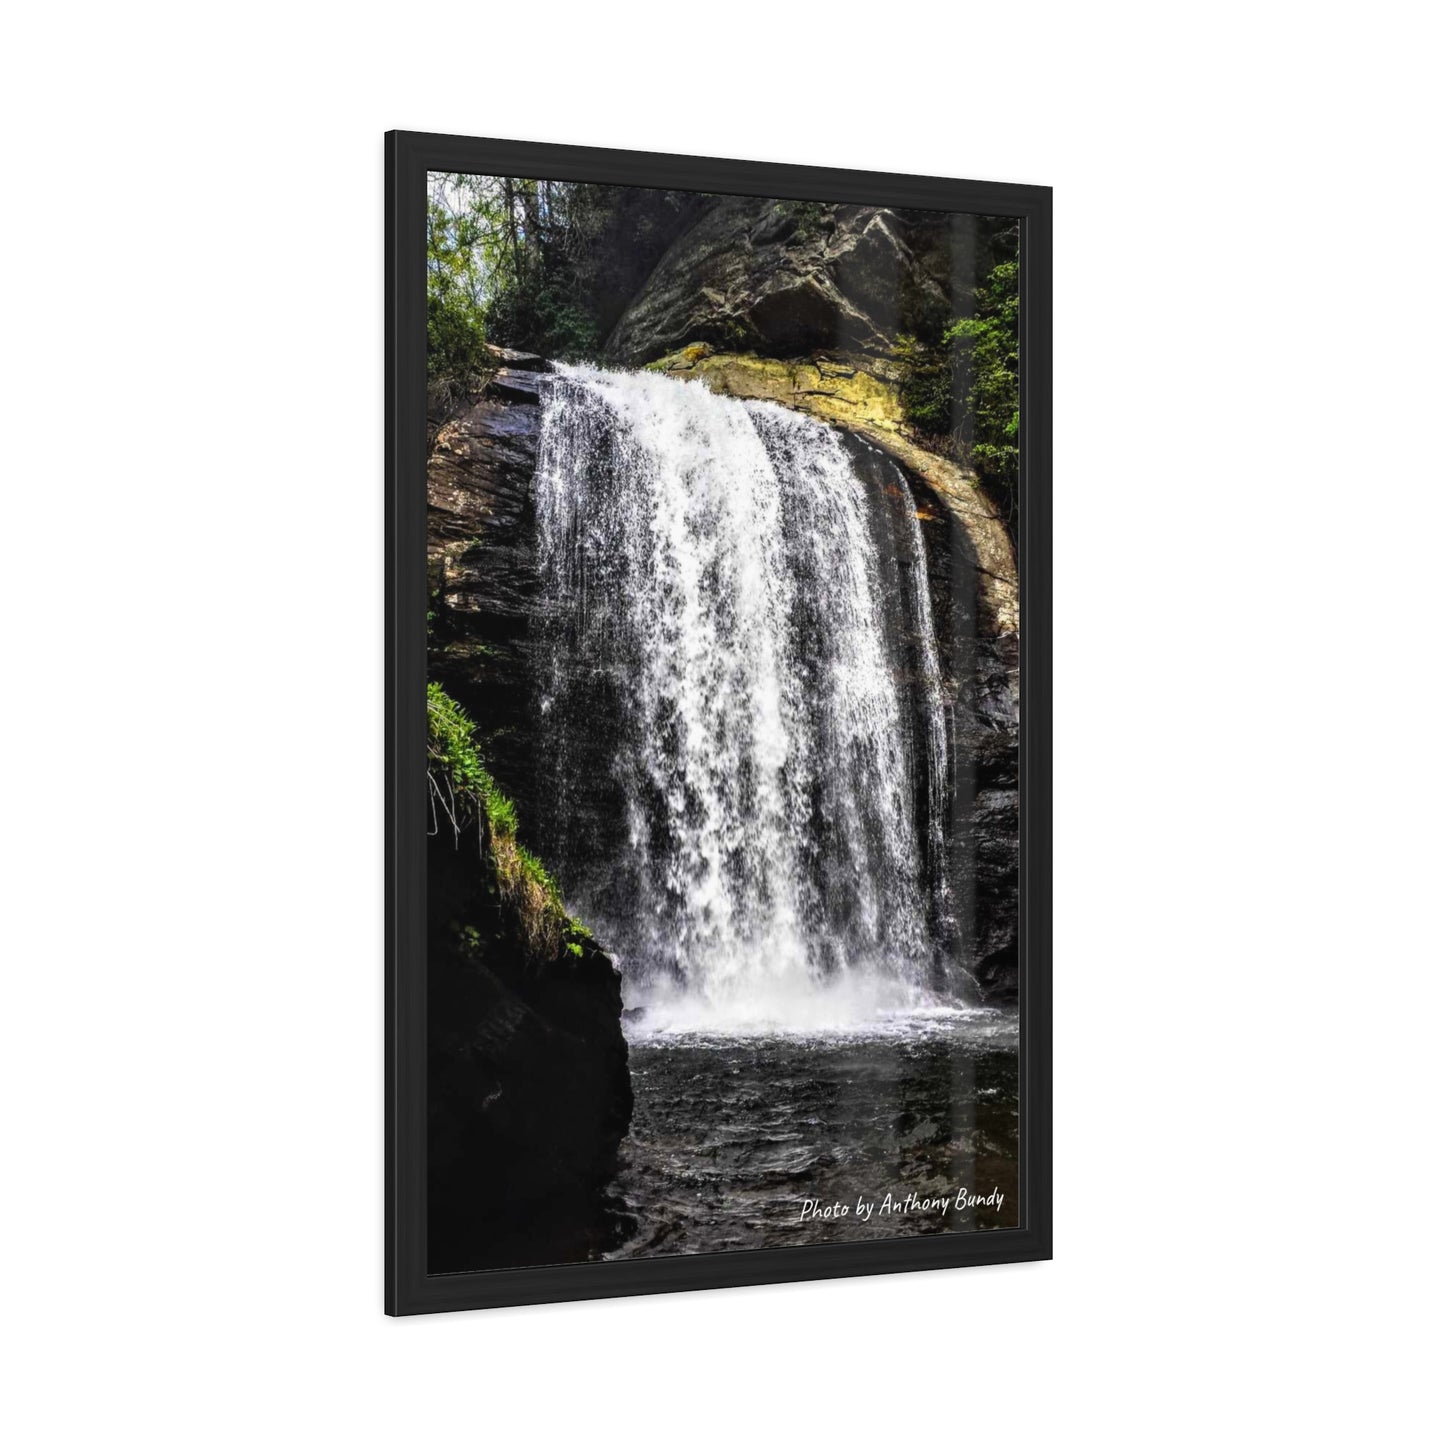 Framed Poster of Waterfall in Asheville, NC, side view.